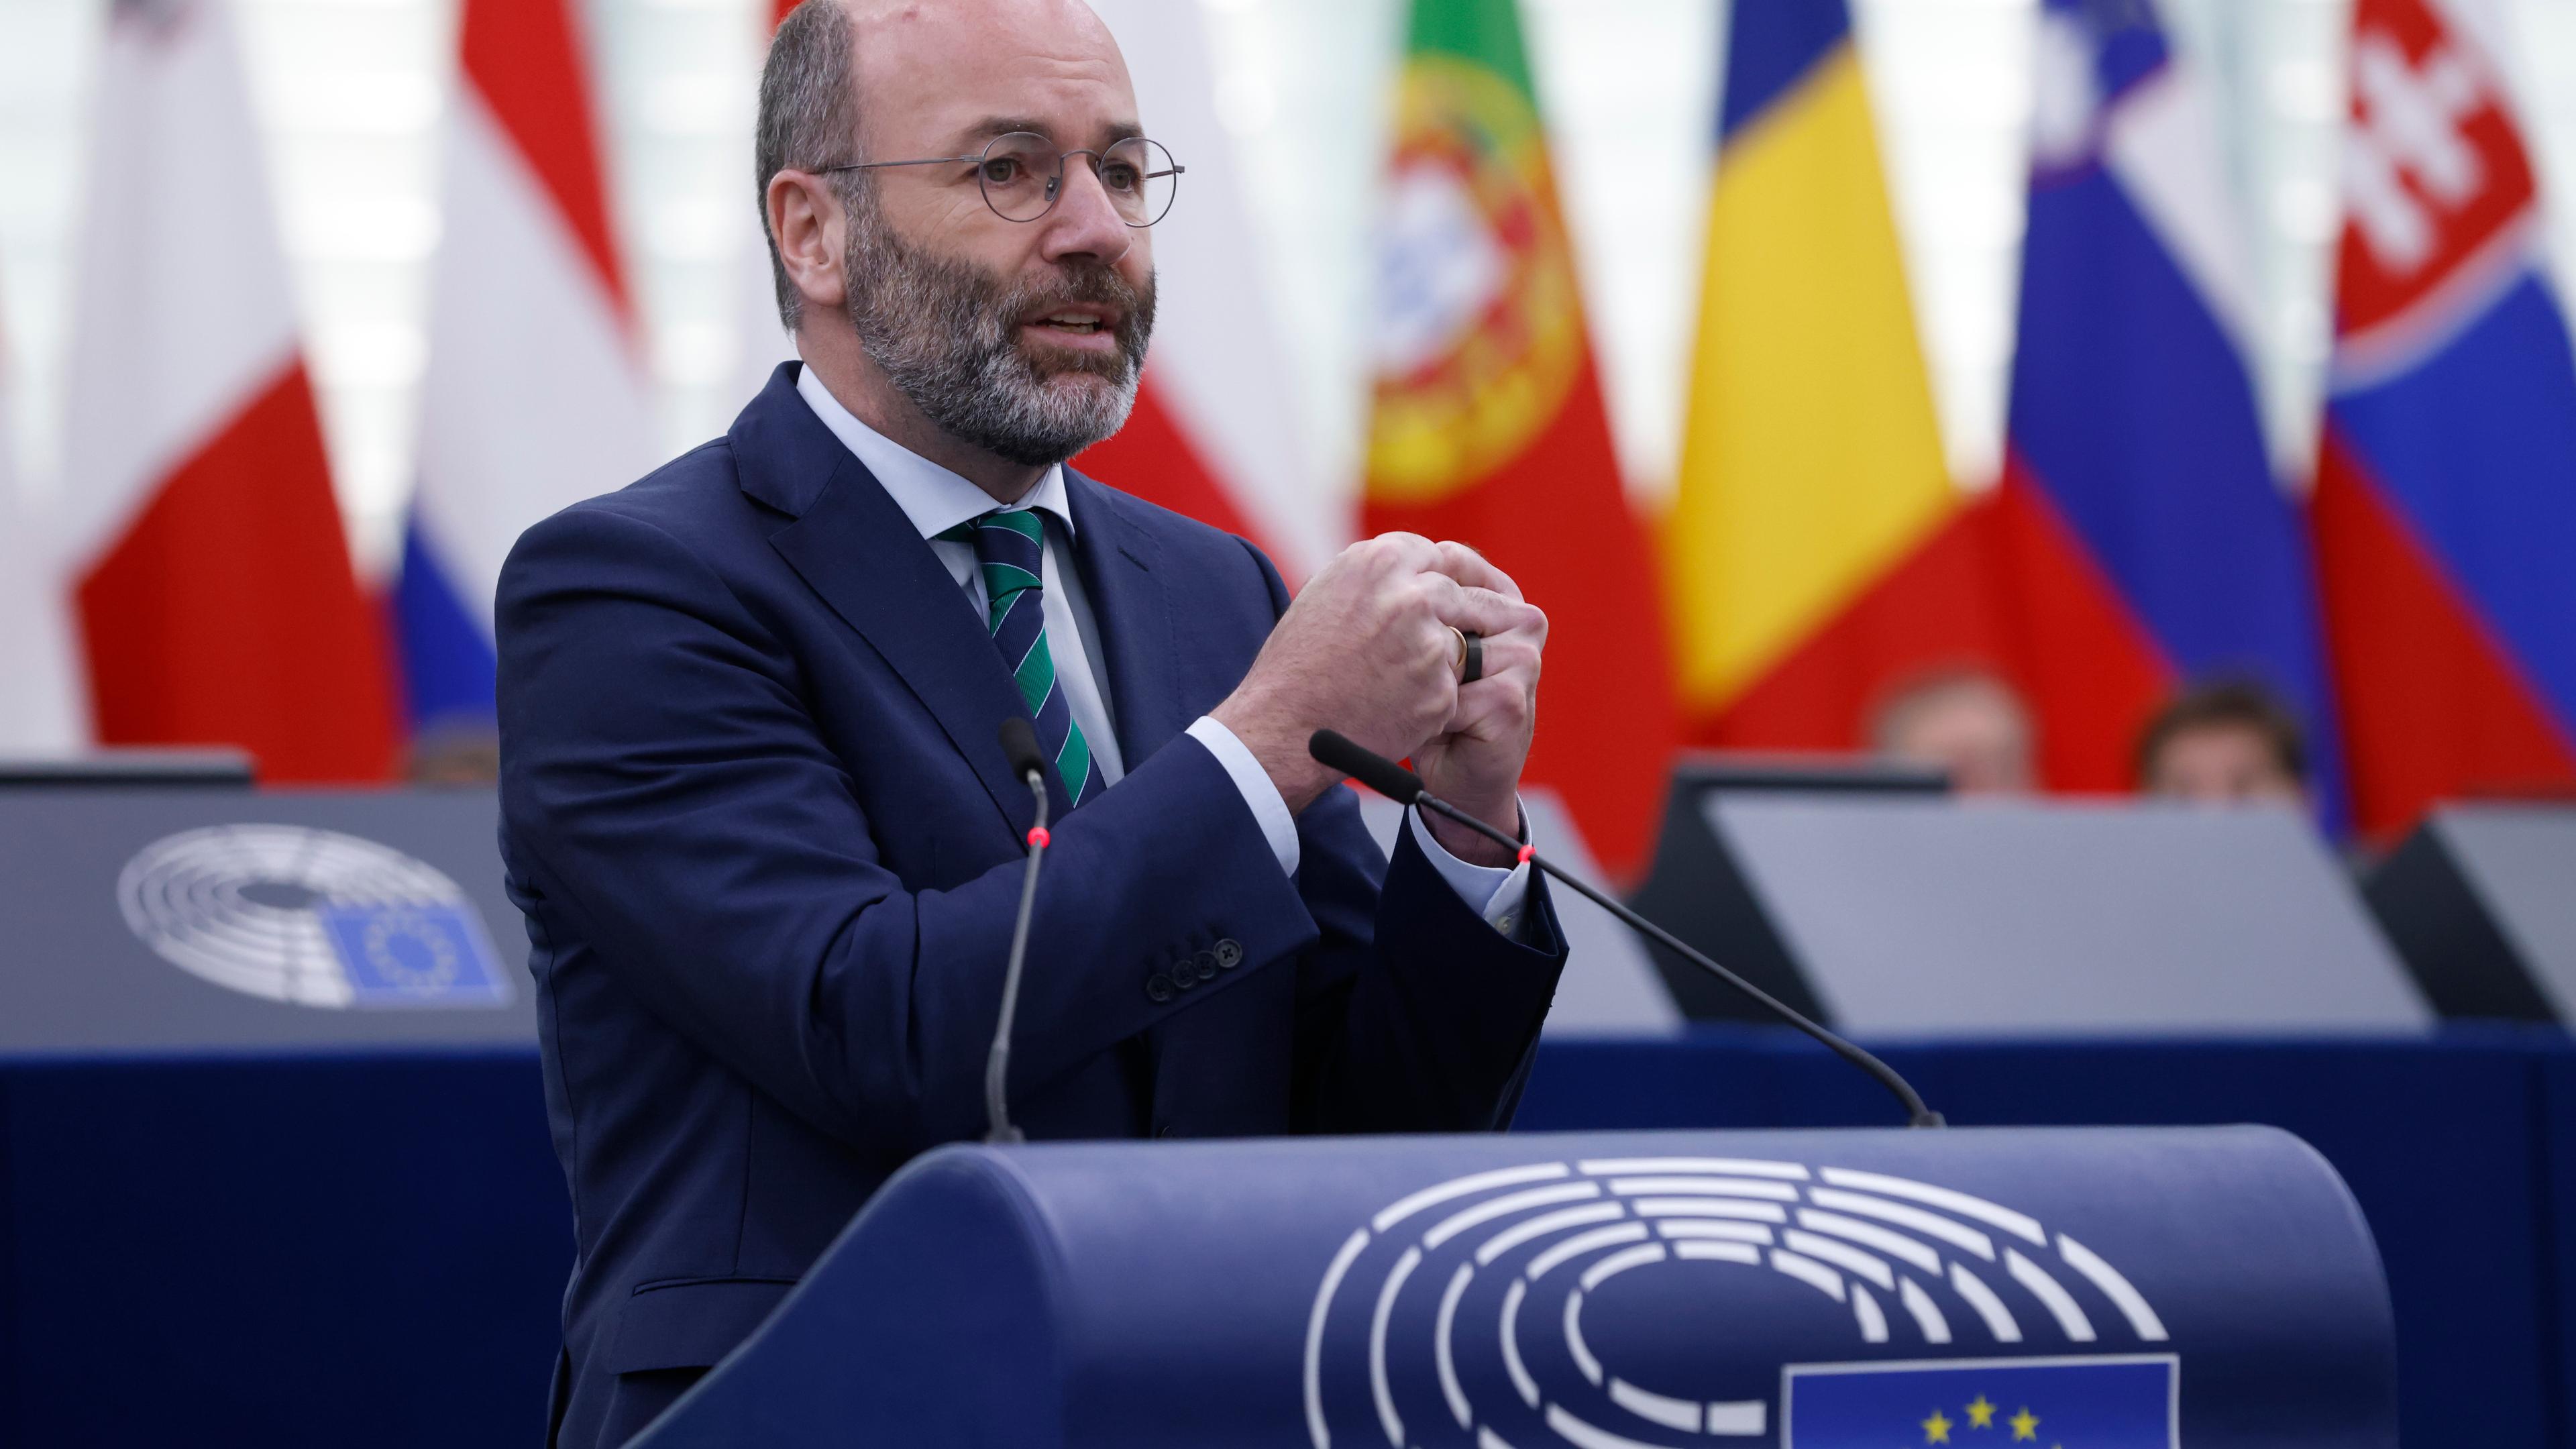 Manfred Weber, President of the EPP group at the European Parliament speaks during a ceremony marking the 70th anniversary of the European Parliament, Tuesday, Nov. 22, 2022 in Strasbourg, eastern France